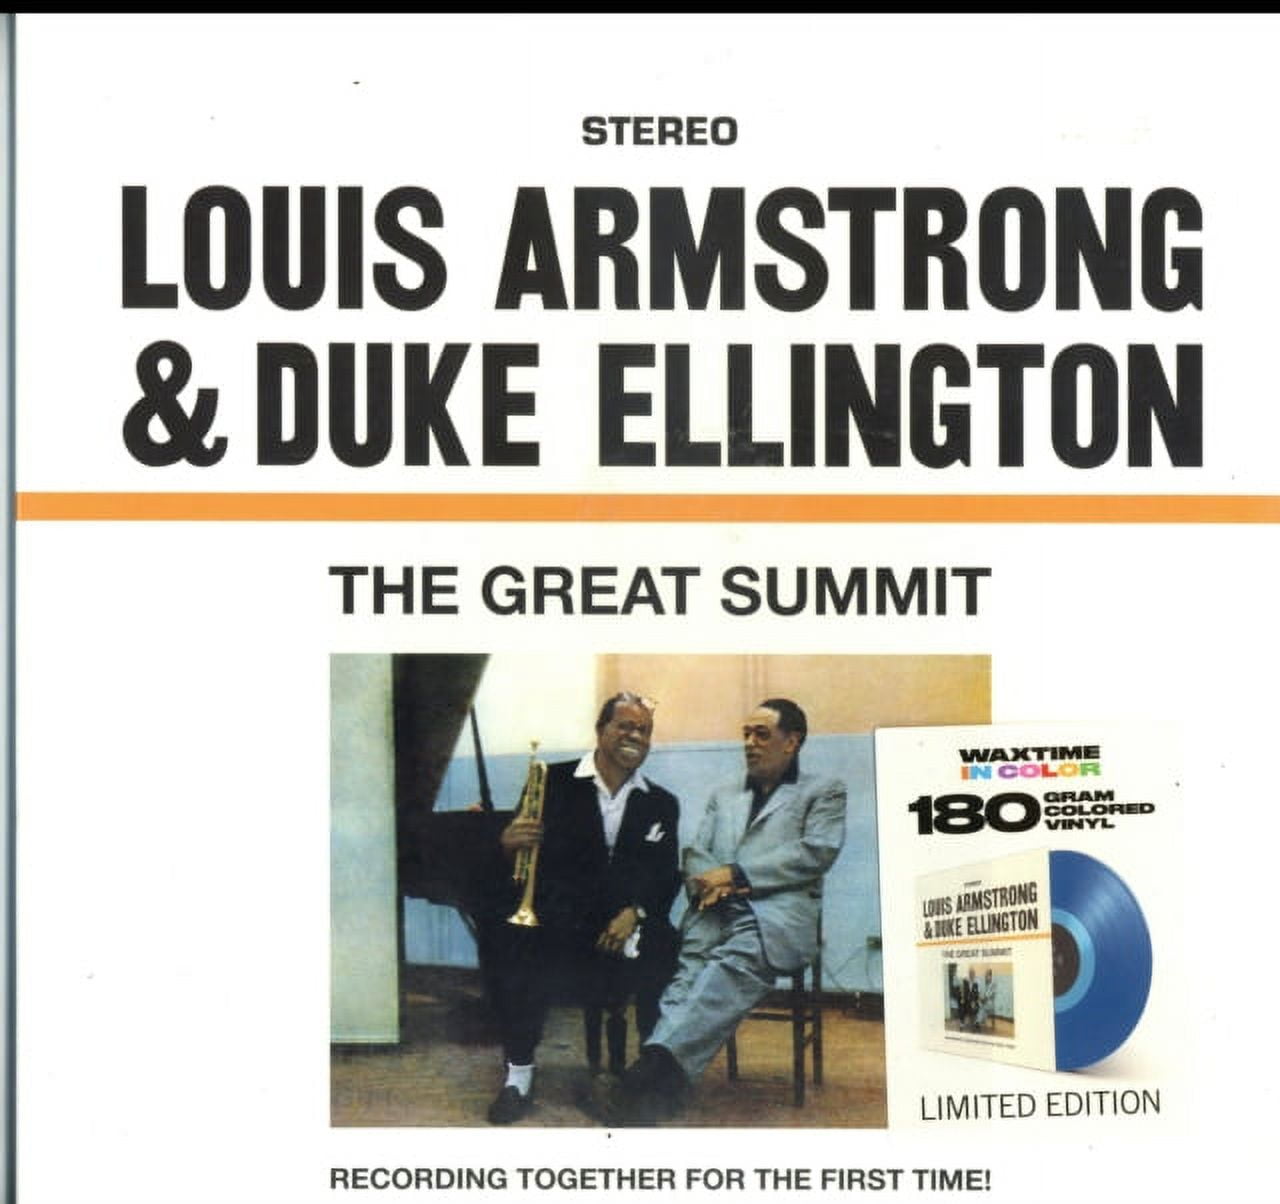 Louis Armstrong and Duke Ellington - Great Summit (Vinyl) (Remaster) (Limited Edition) $12.22